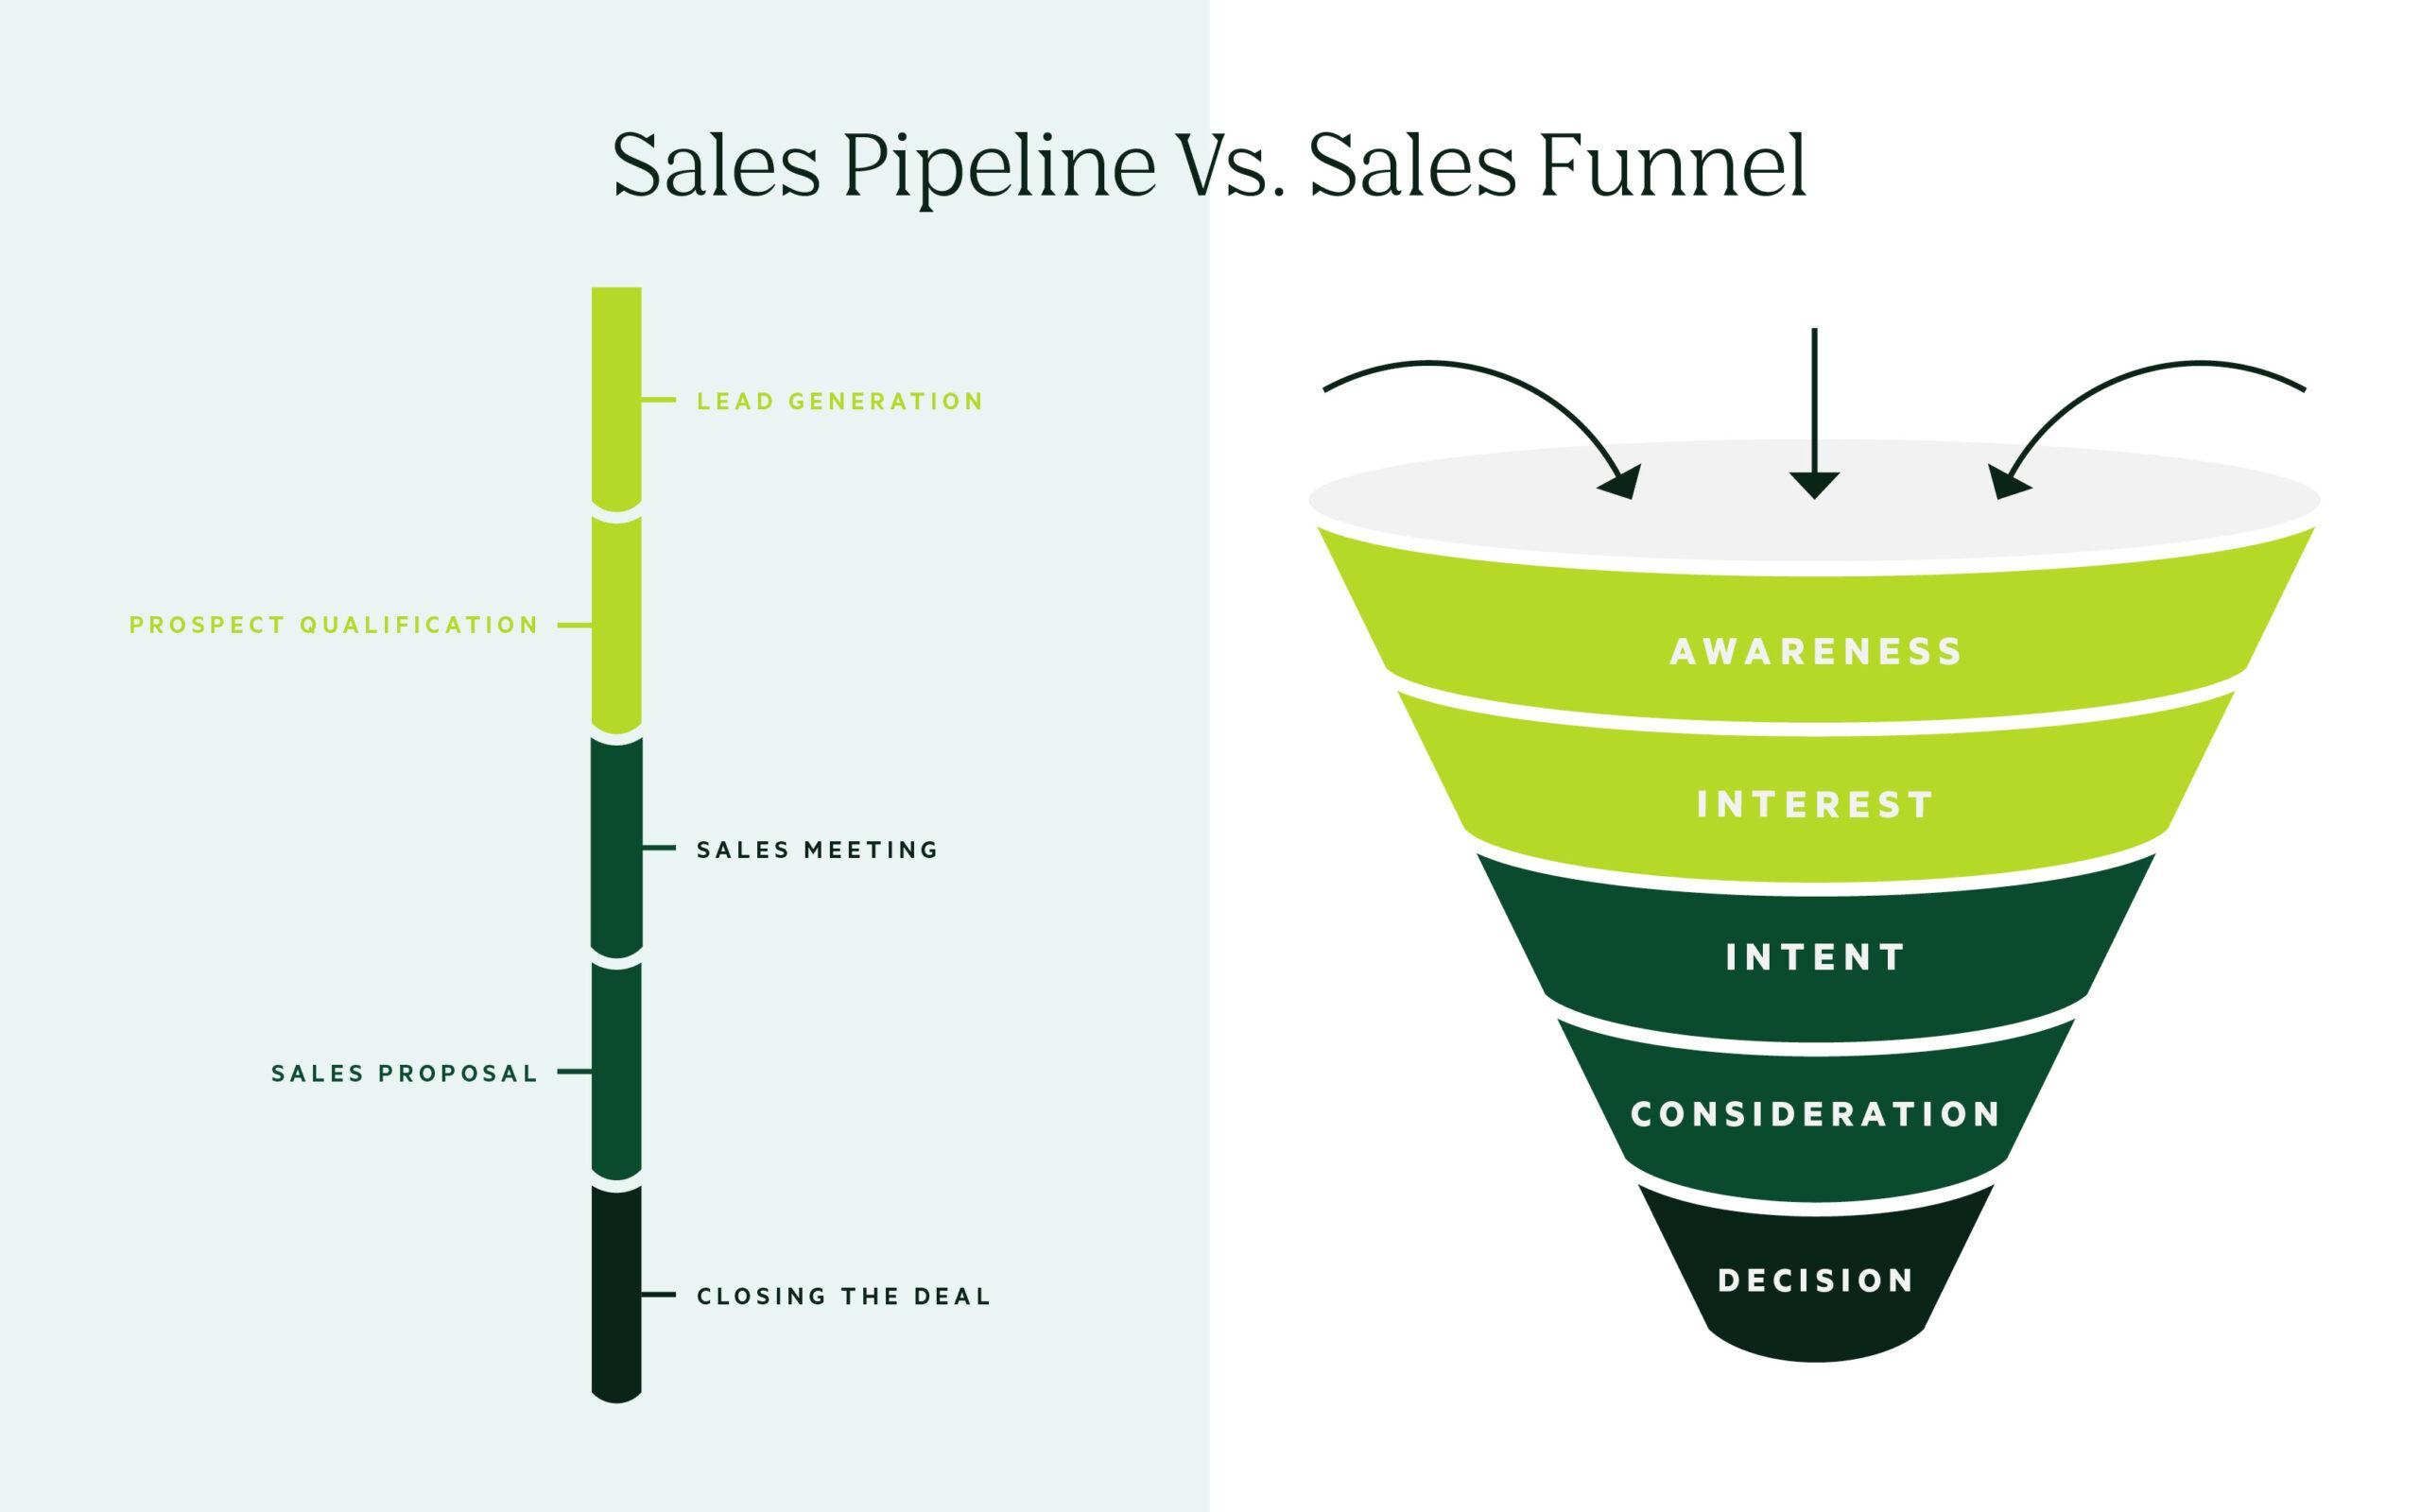 Explore the differences between sales pipeline and sales funnel